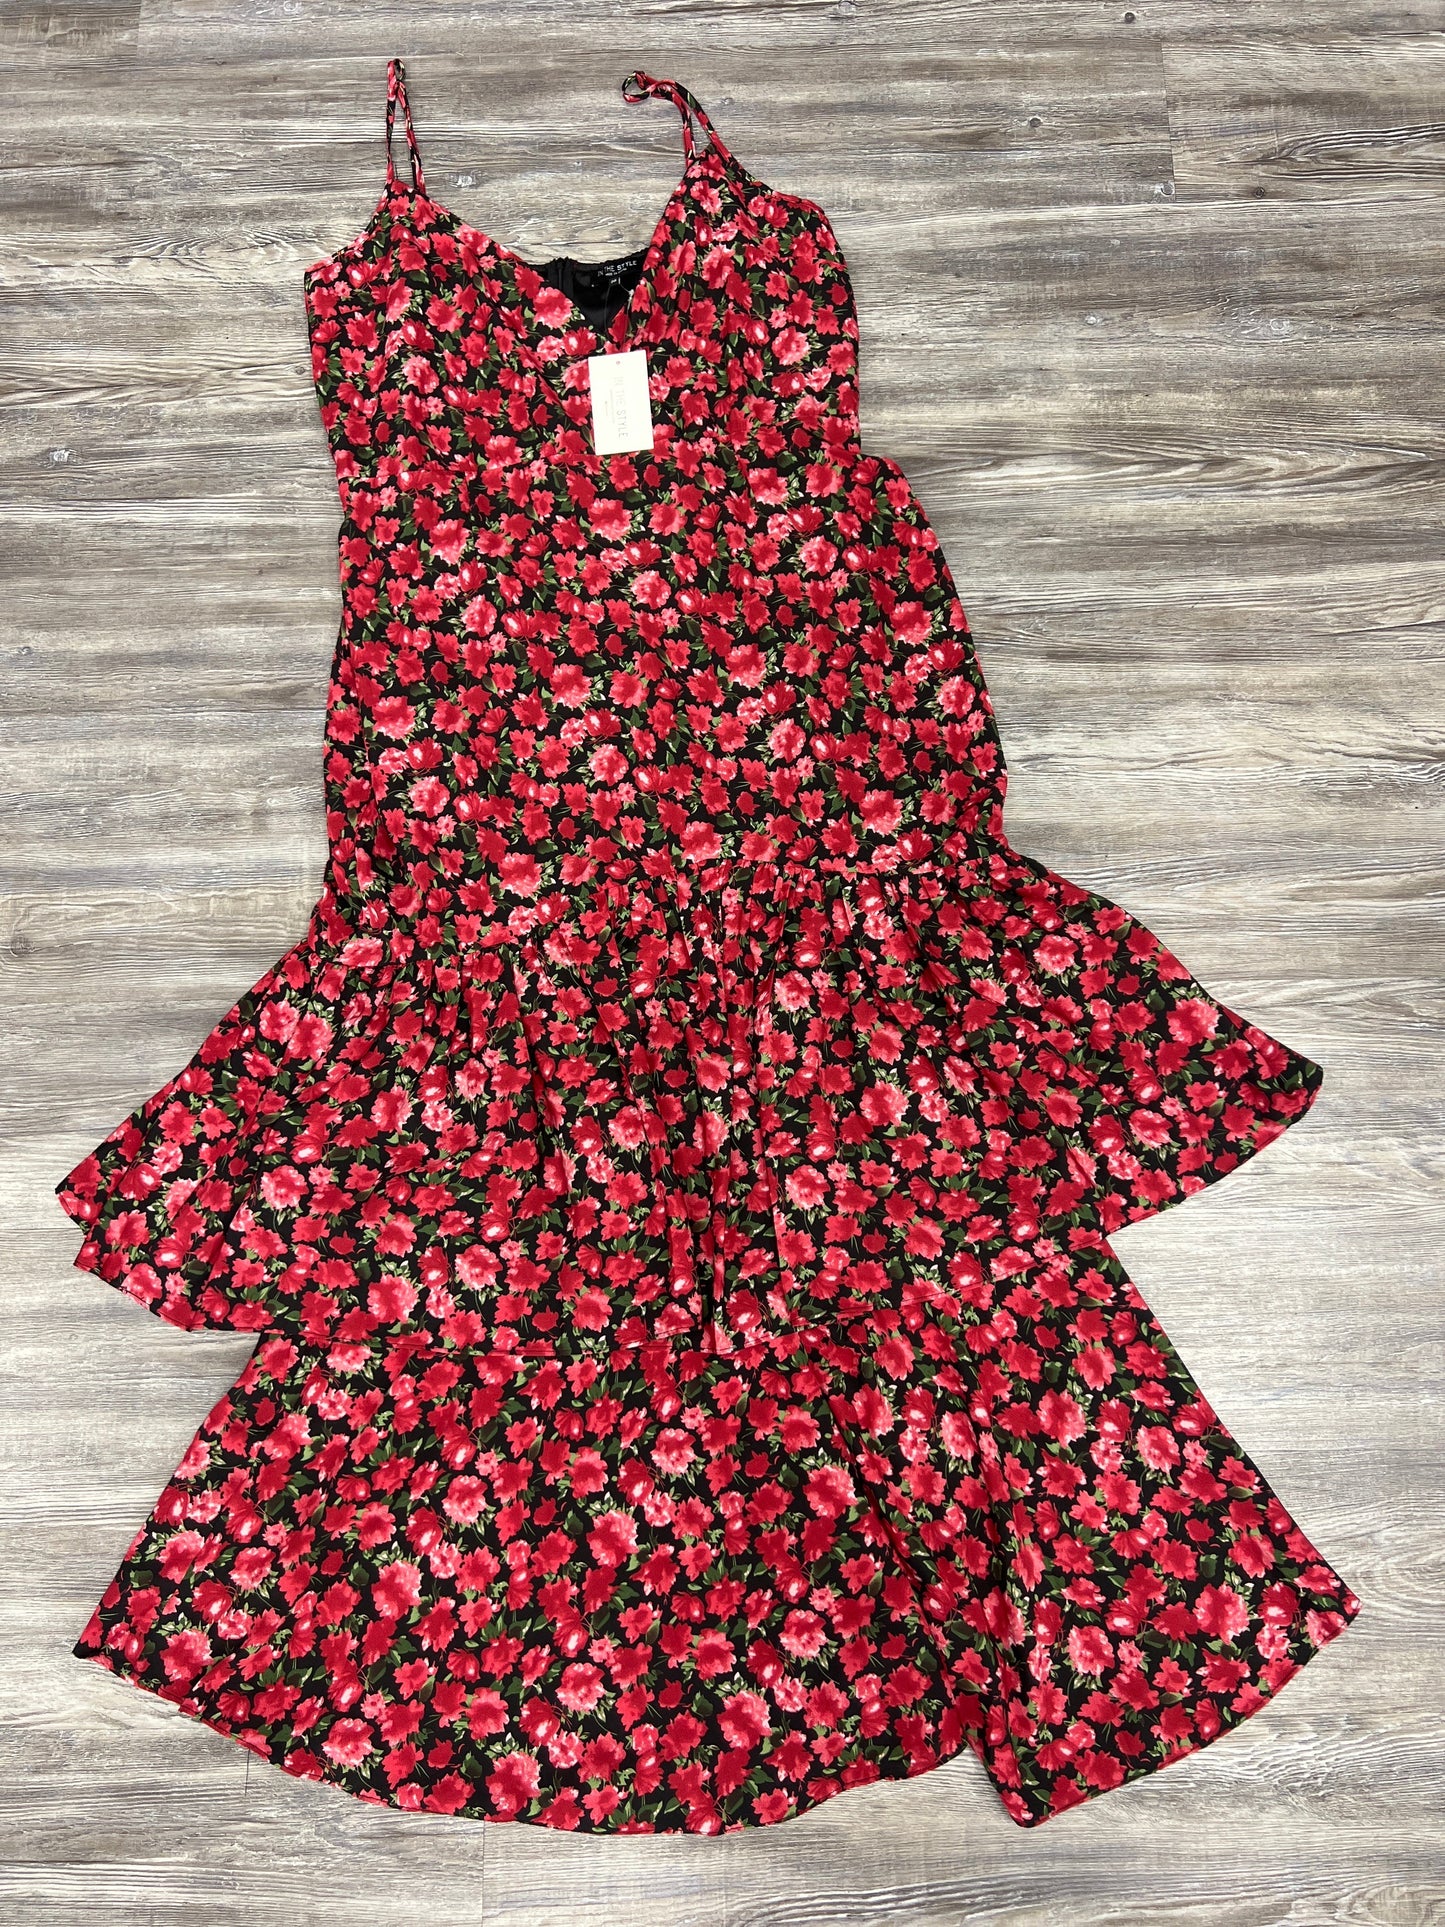 Floral Print Dress Party Long In The Style, Size 2x